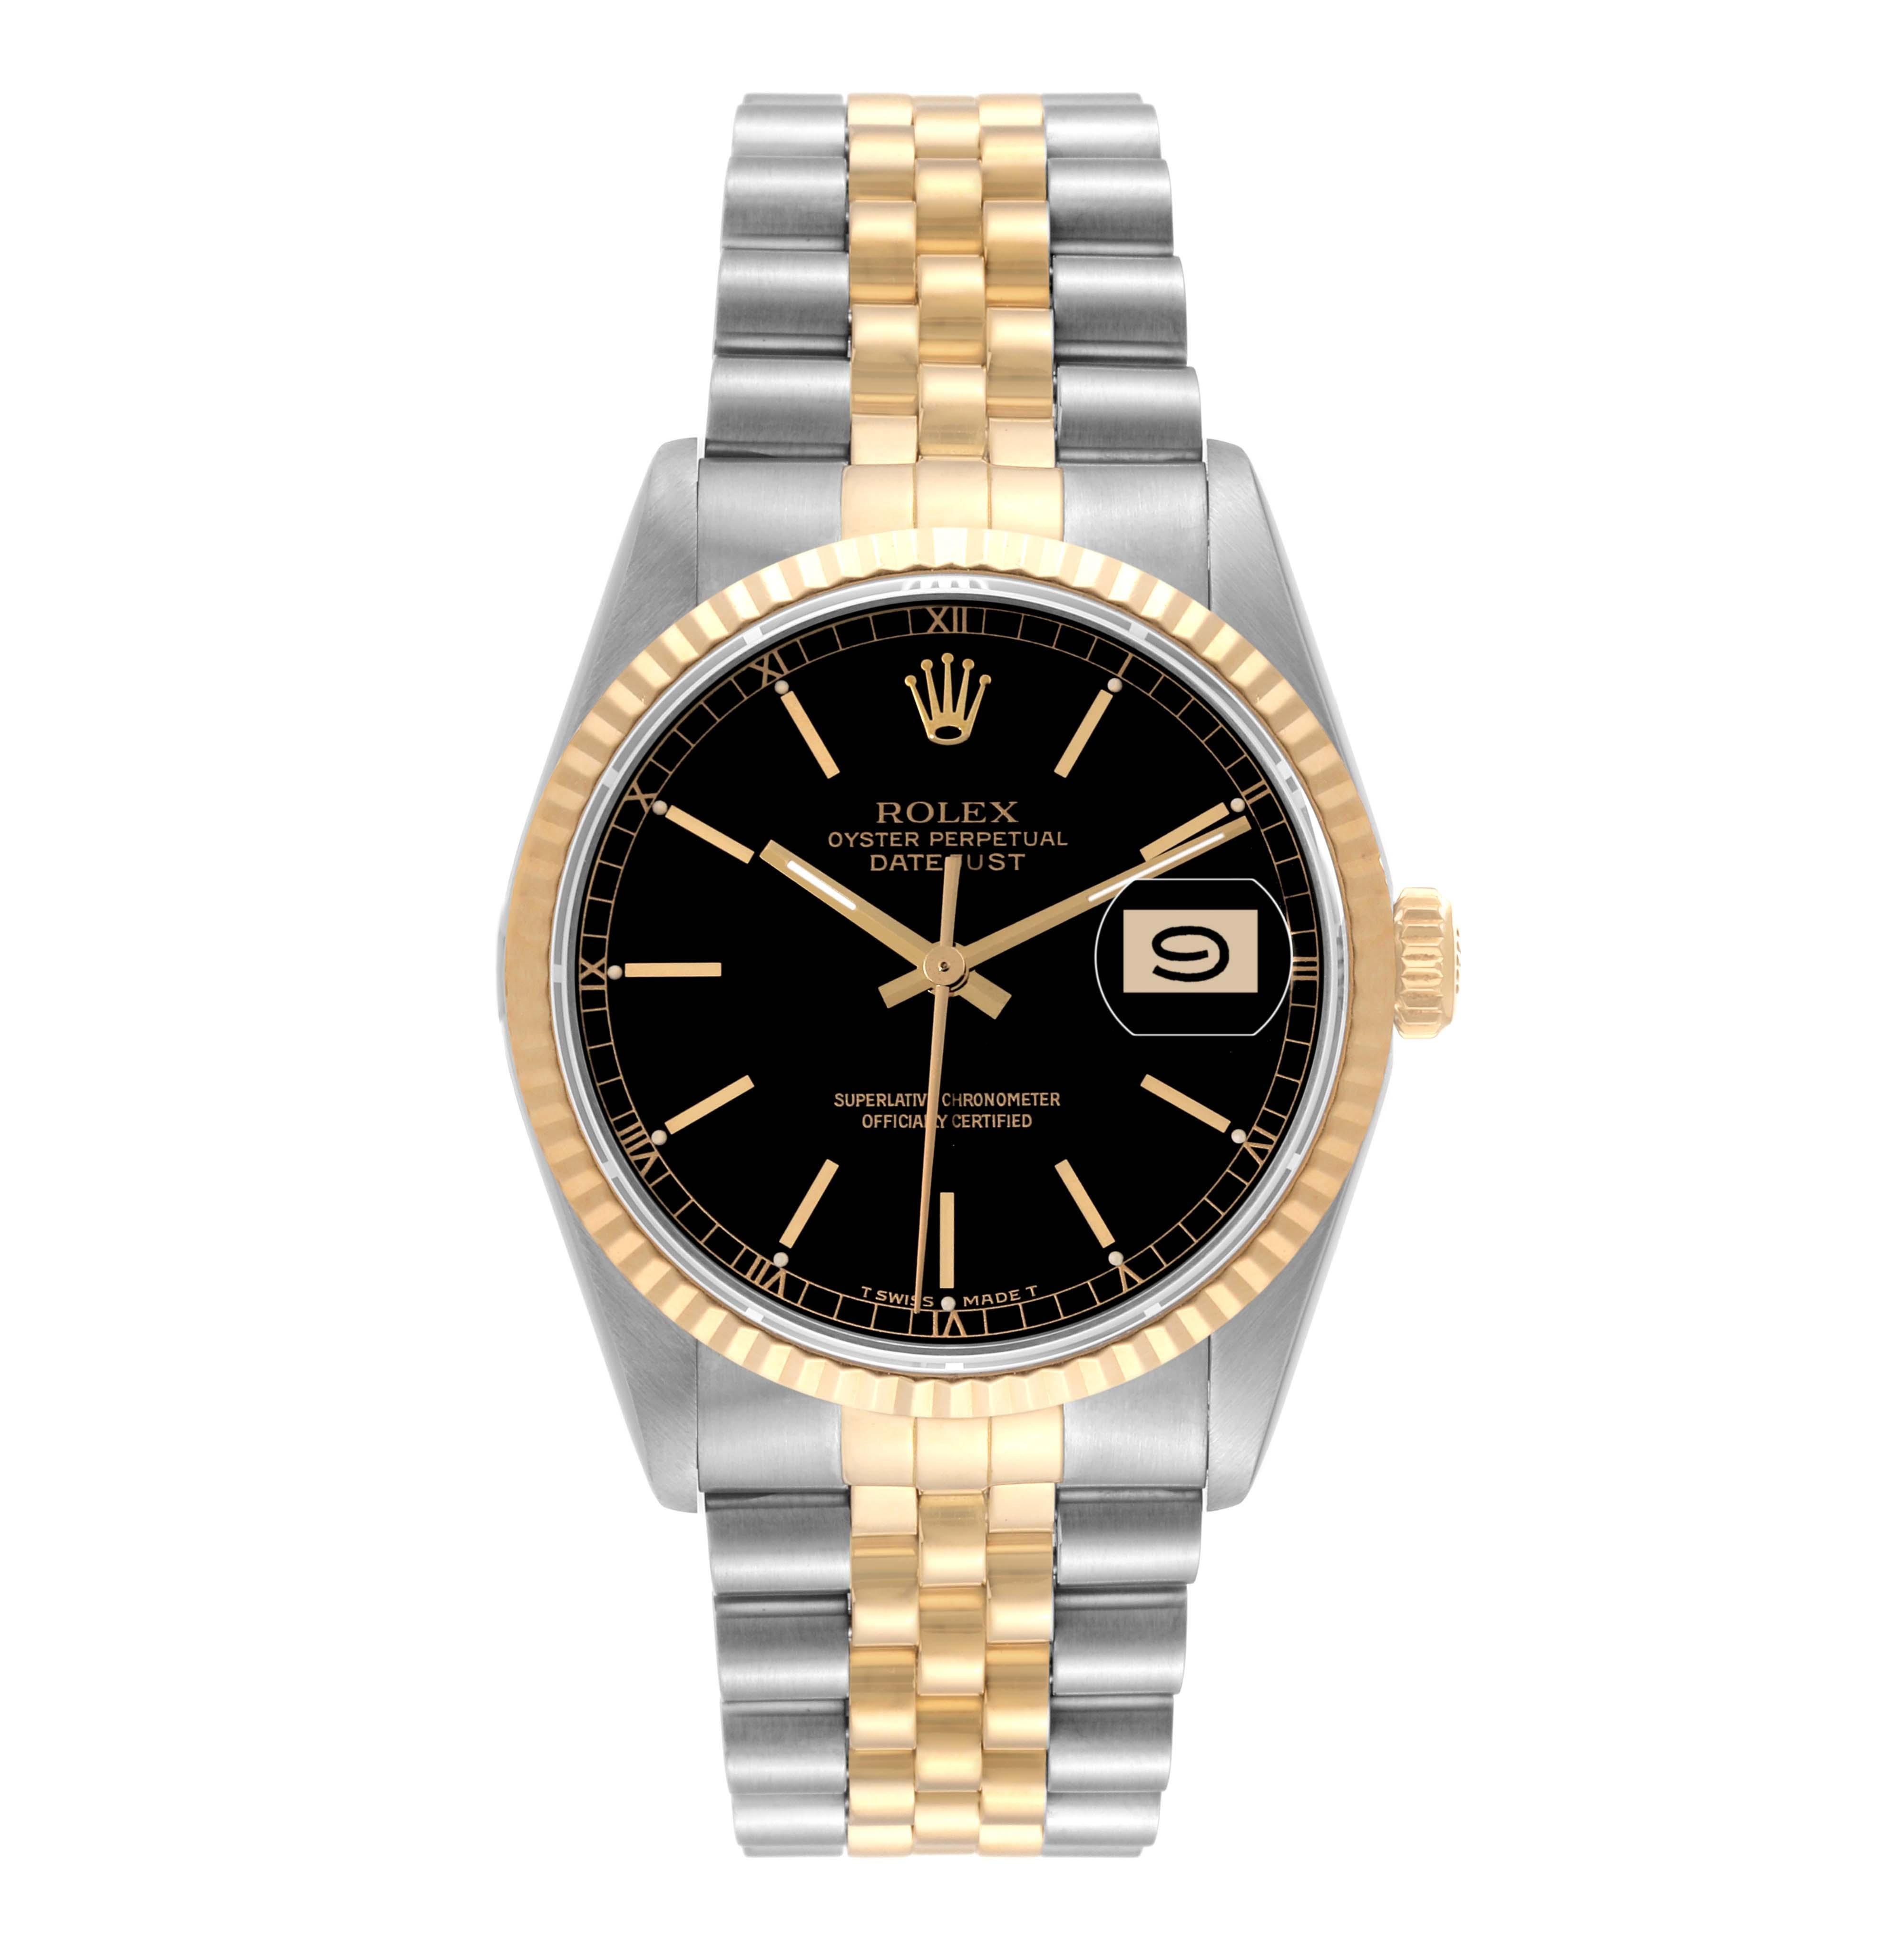 Rolex Datejust 36 Steel Yellow Gold Black Dial Mens Watch 16233. Officially certified chronometer automatic self-winding movement. Stainless steel case 36 mm in diameter.  Rolex logo on an 18k yellow gold crown. 18k yellow gold fluted bezel. Scratch